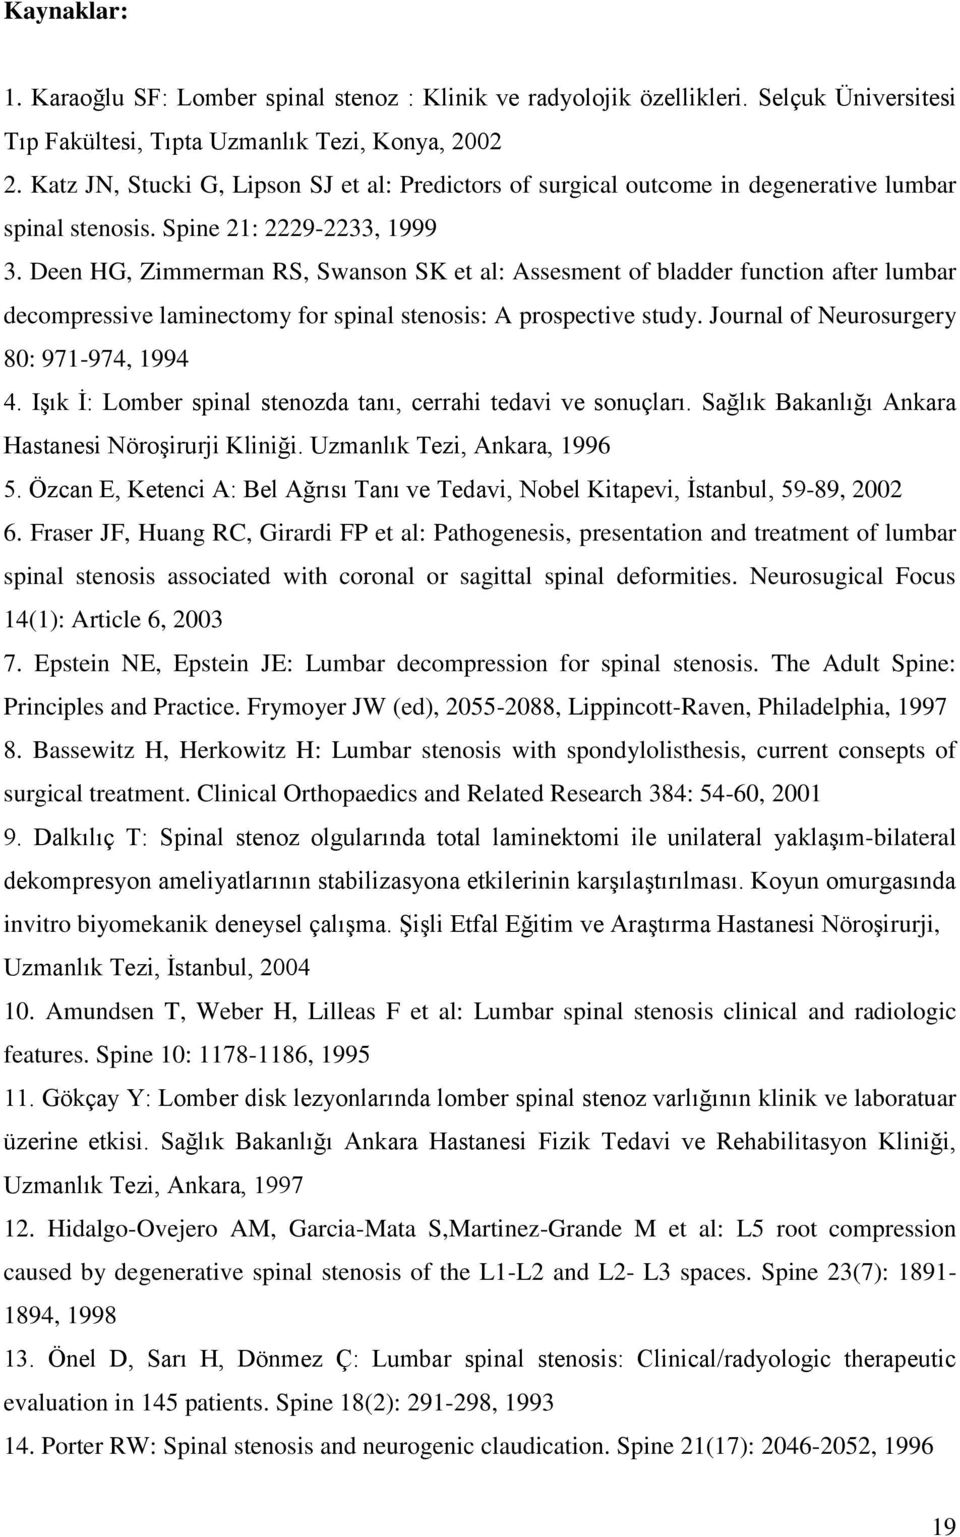 Deen HG, Zimmerman RS, Swanson SK et al: Assesment of bladder function after lumbar decompressive laminectomy for spinal stenosis: A prospective study. Journal of Neurosurgery 80: 971-974, 1994 4.